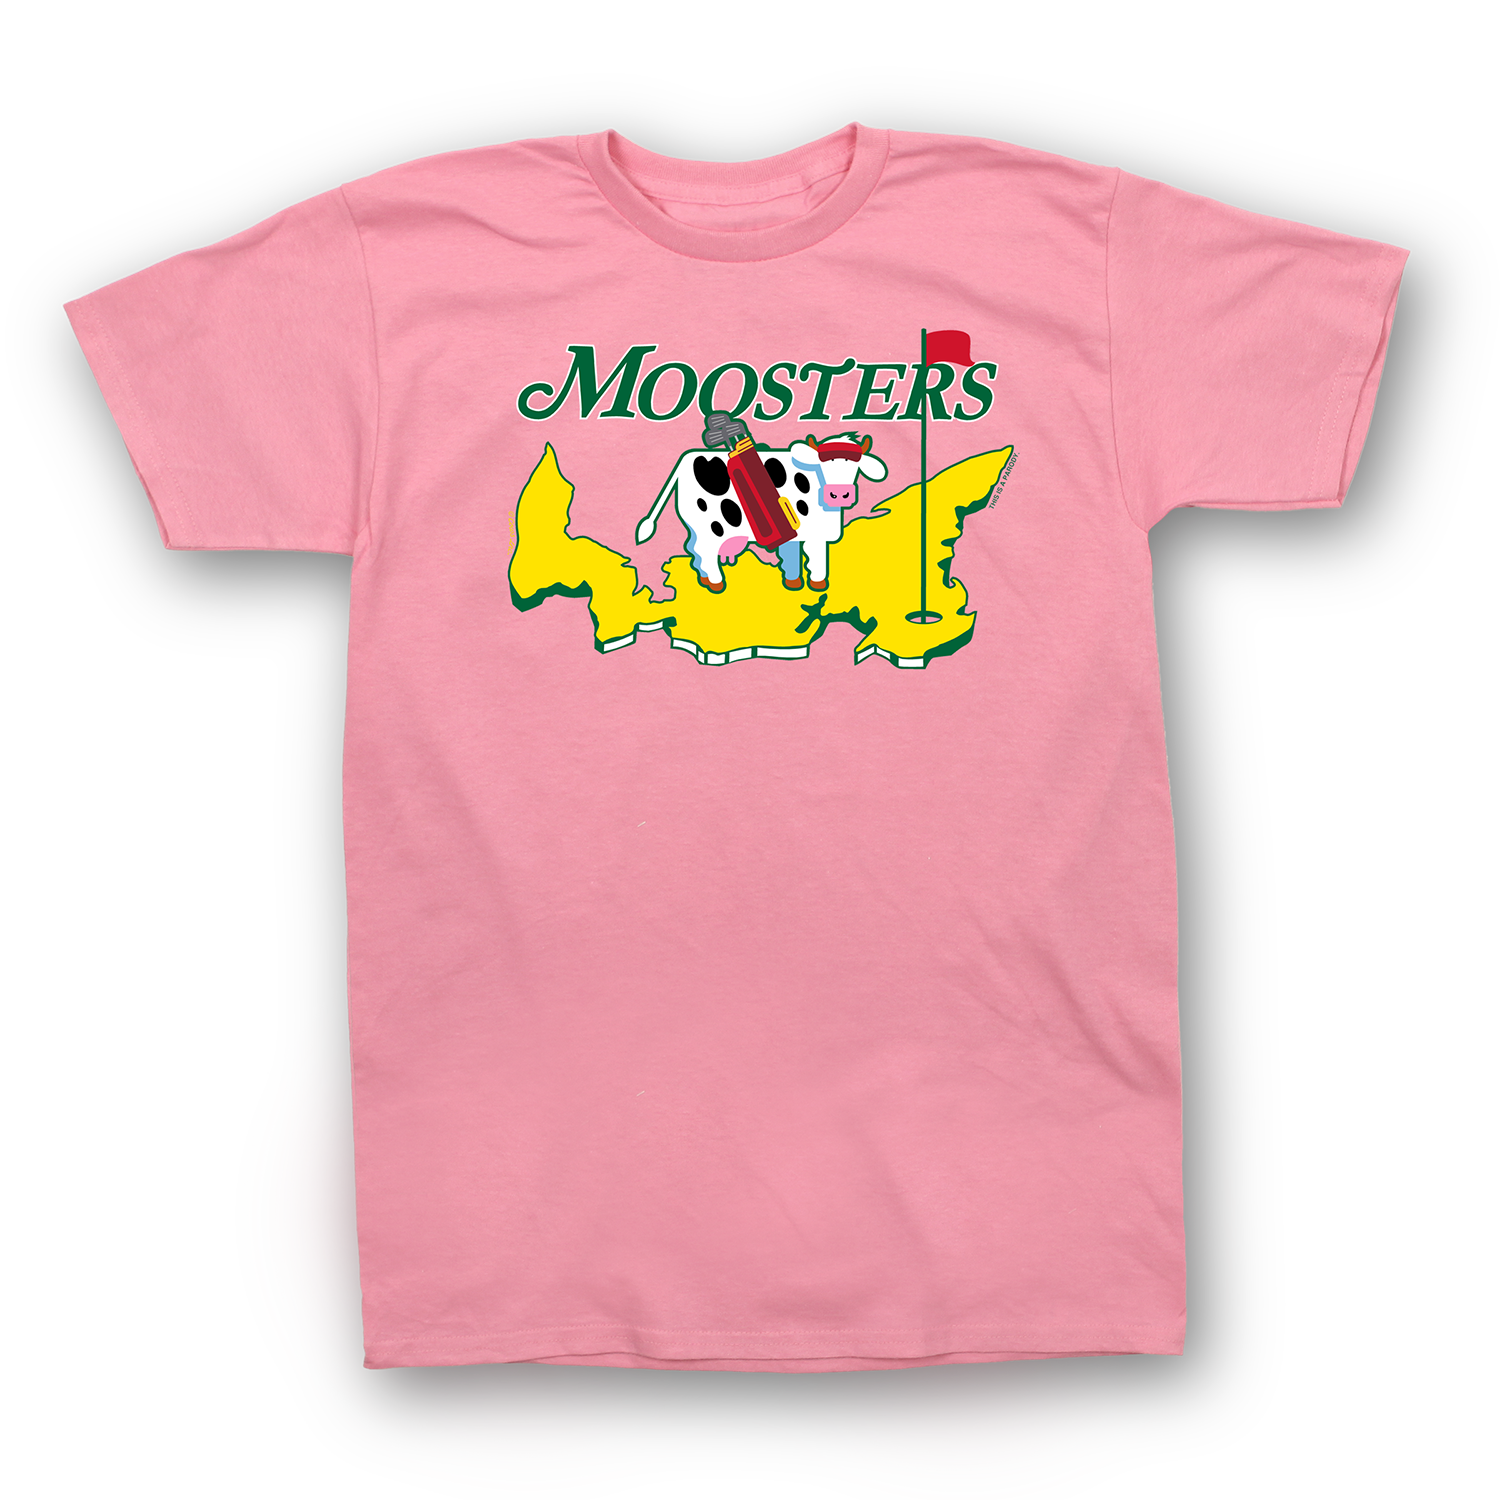 MOOsters Adult T